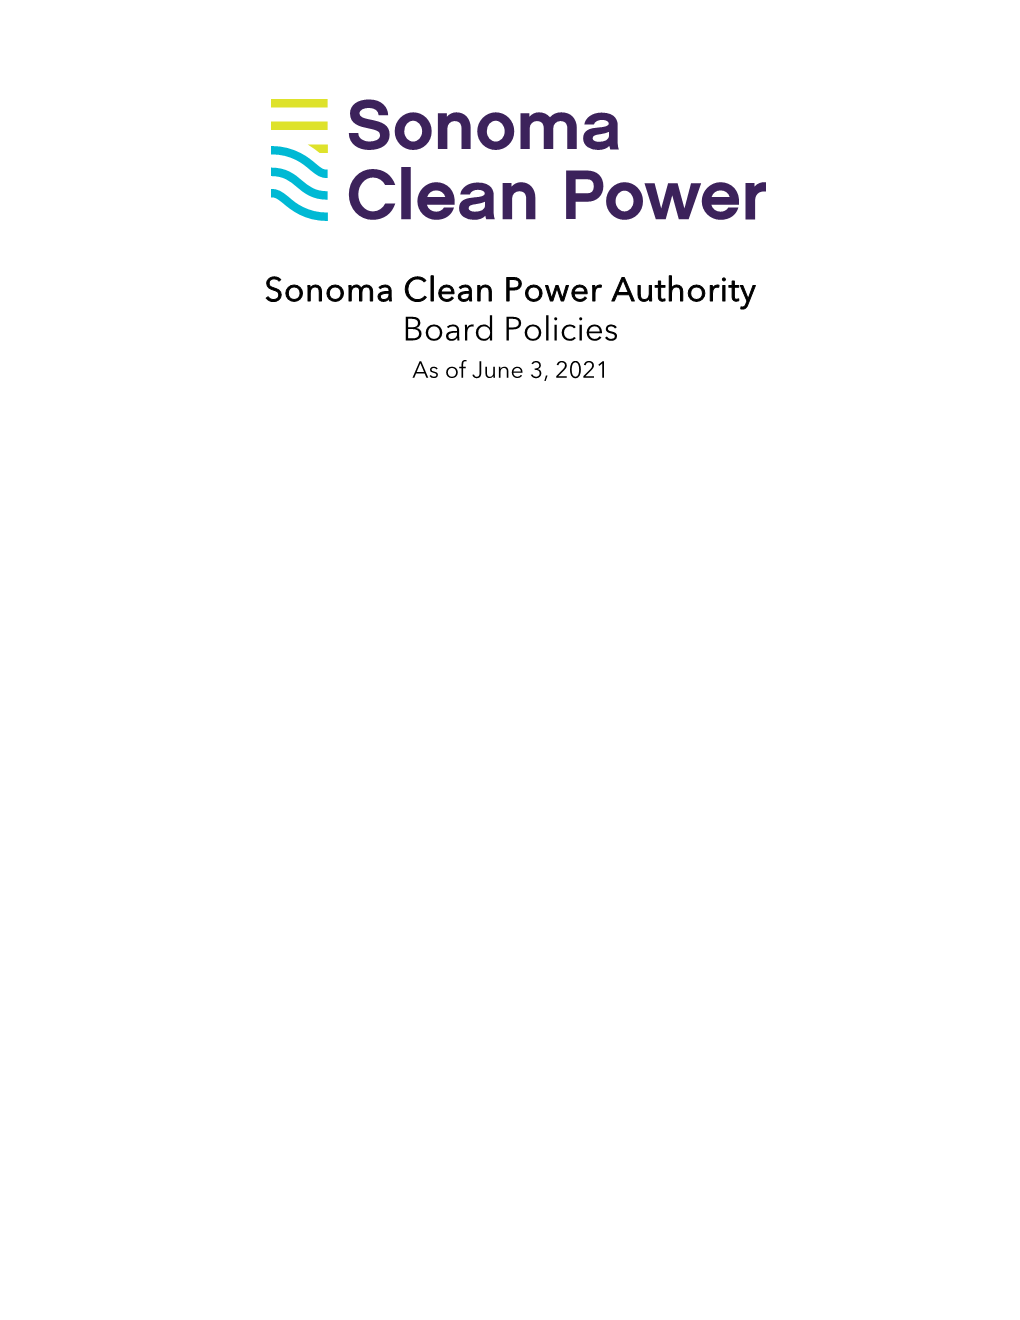 Sonoma Clean Power Authority Board Policies As of June 3, 2021